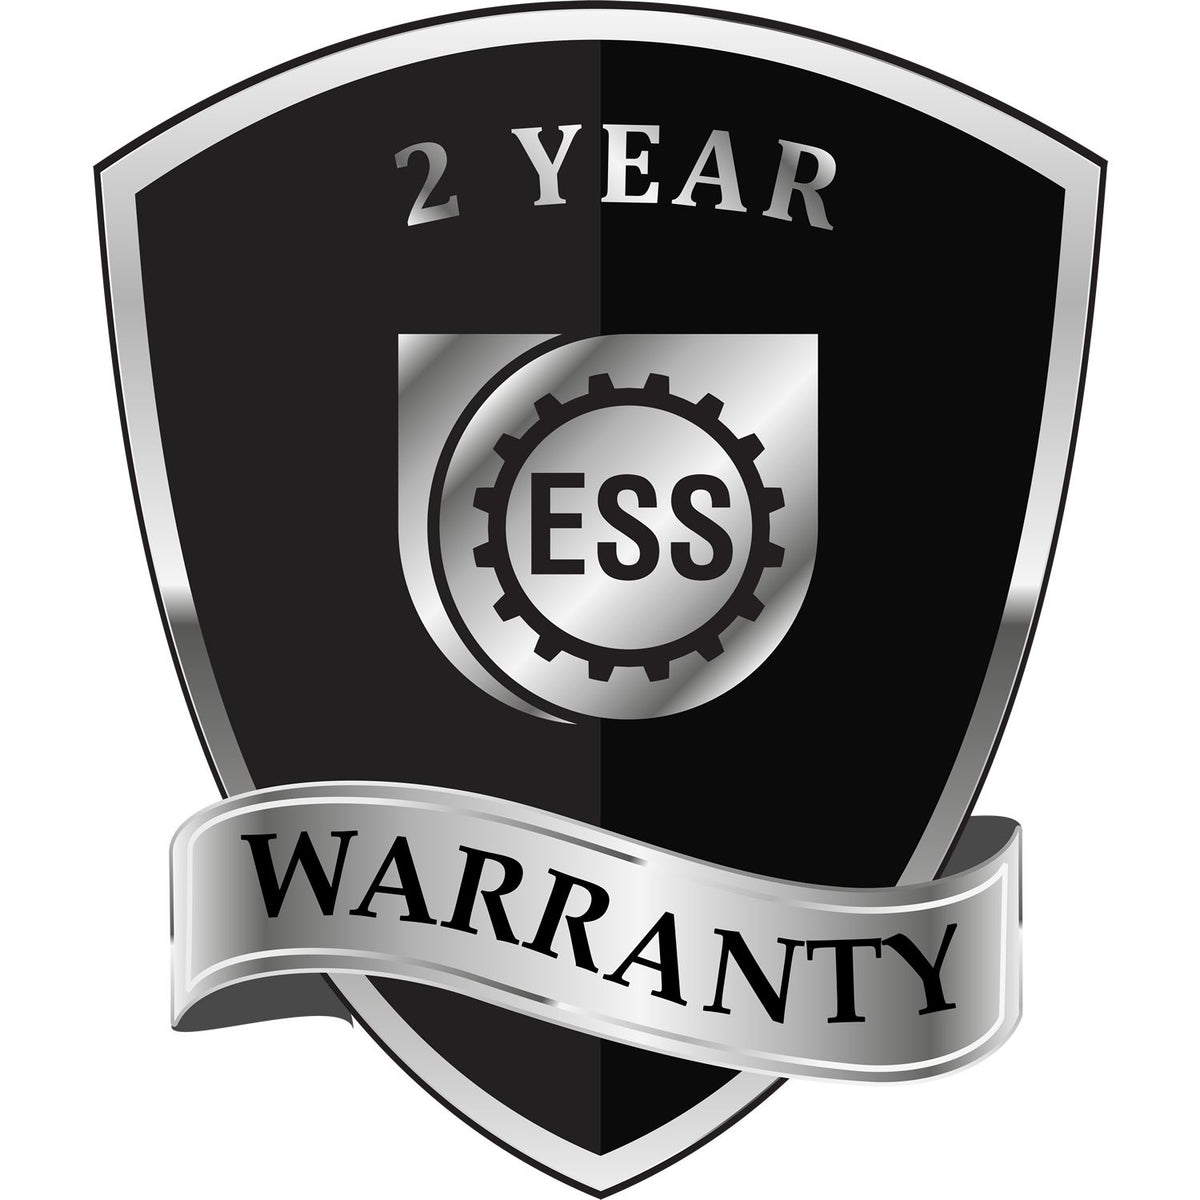 A badge or emblem showing a warranty icon for the District of Columbia Engineer Desk Seal